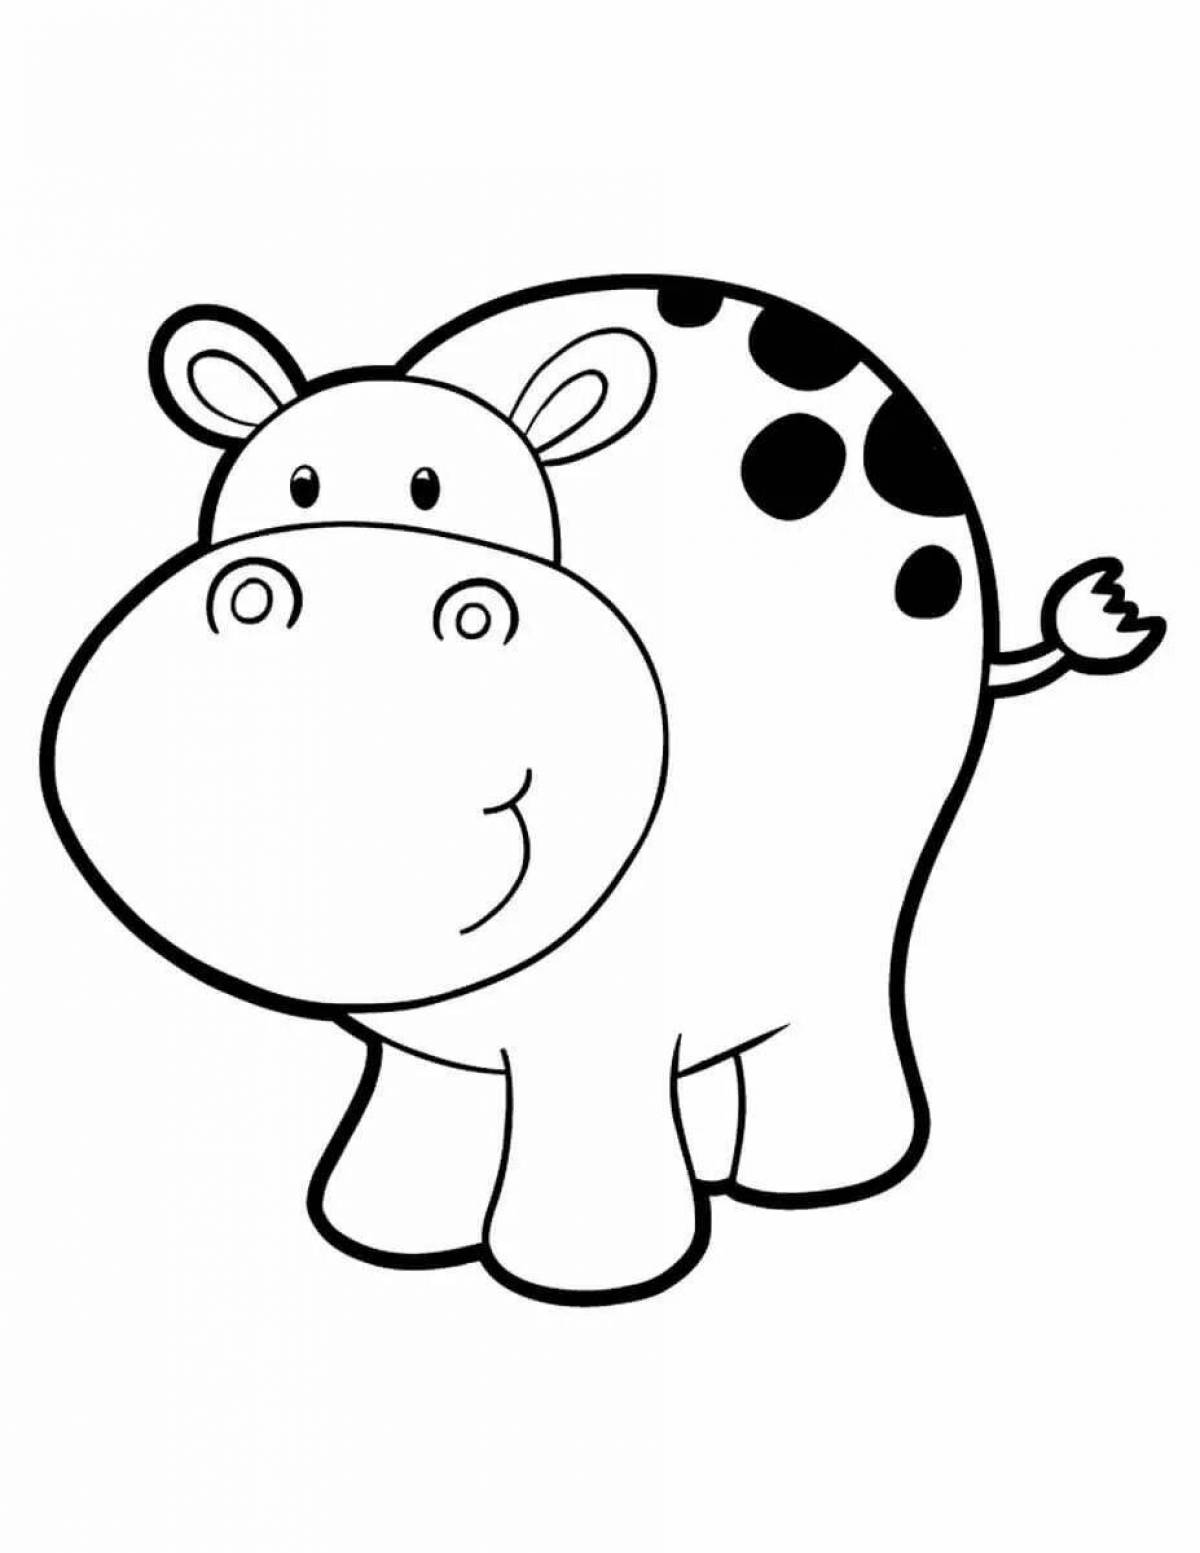 Playful hippo coloring page for kids